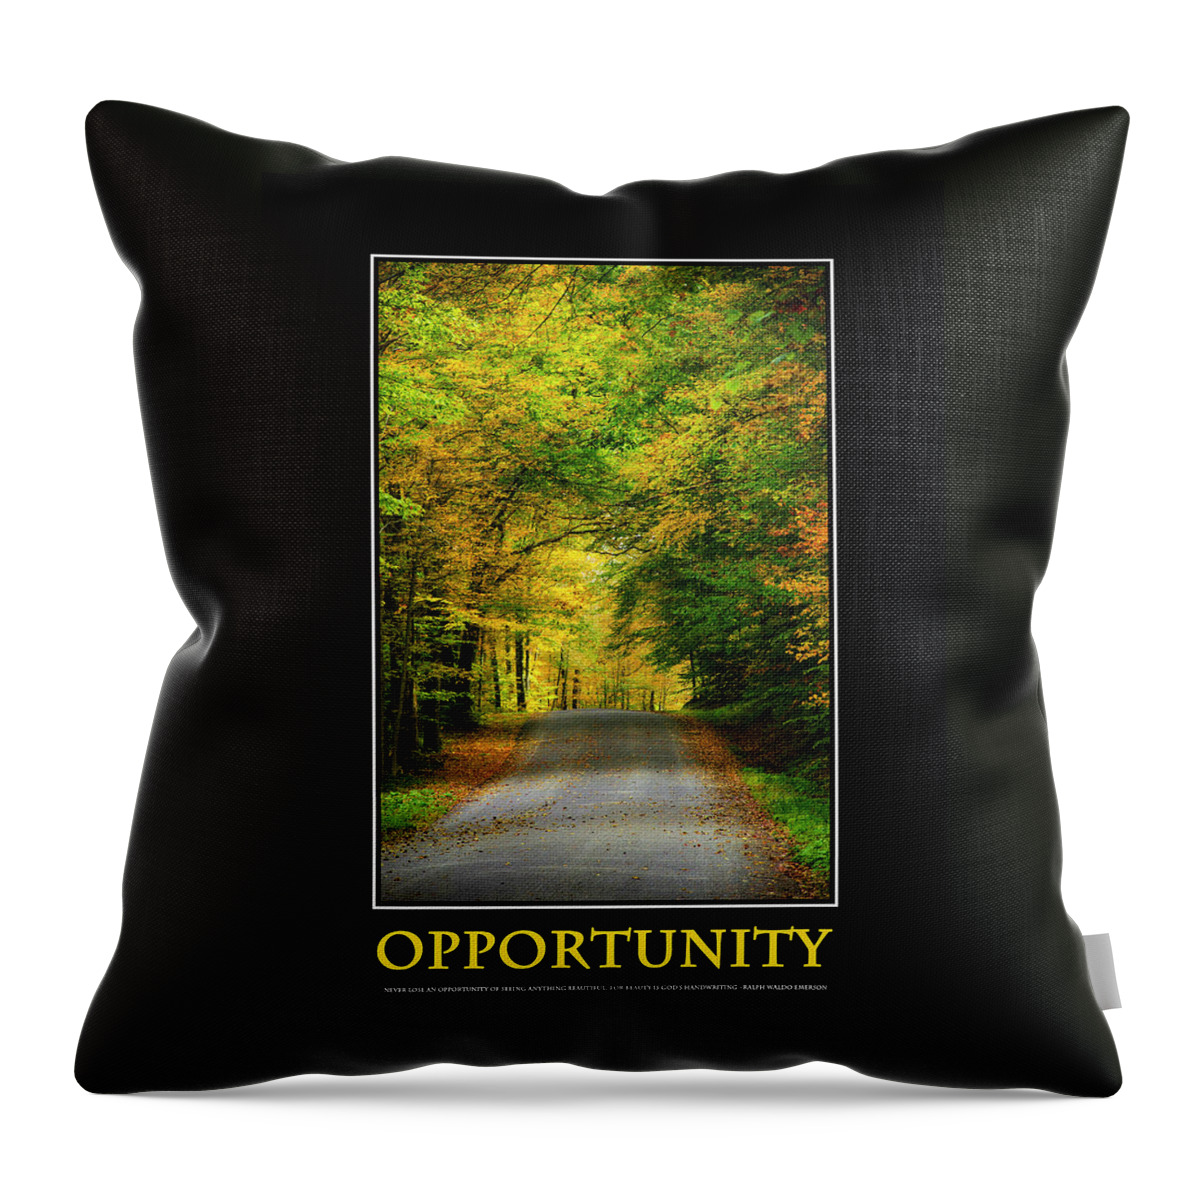 Inspirational Throw Pillow featuring the mixed media Opportunity Inspirational Motivational Poster Art by Christina Rollo